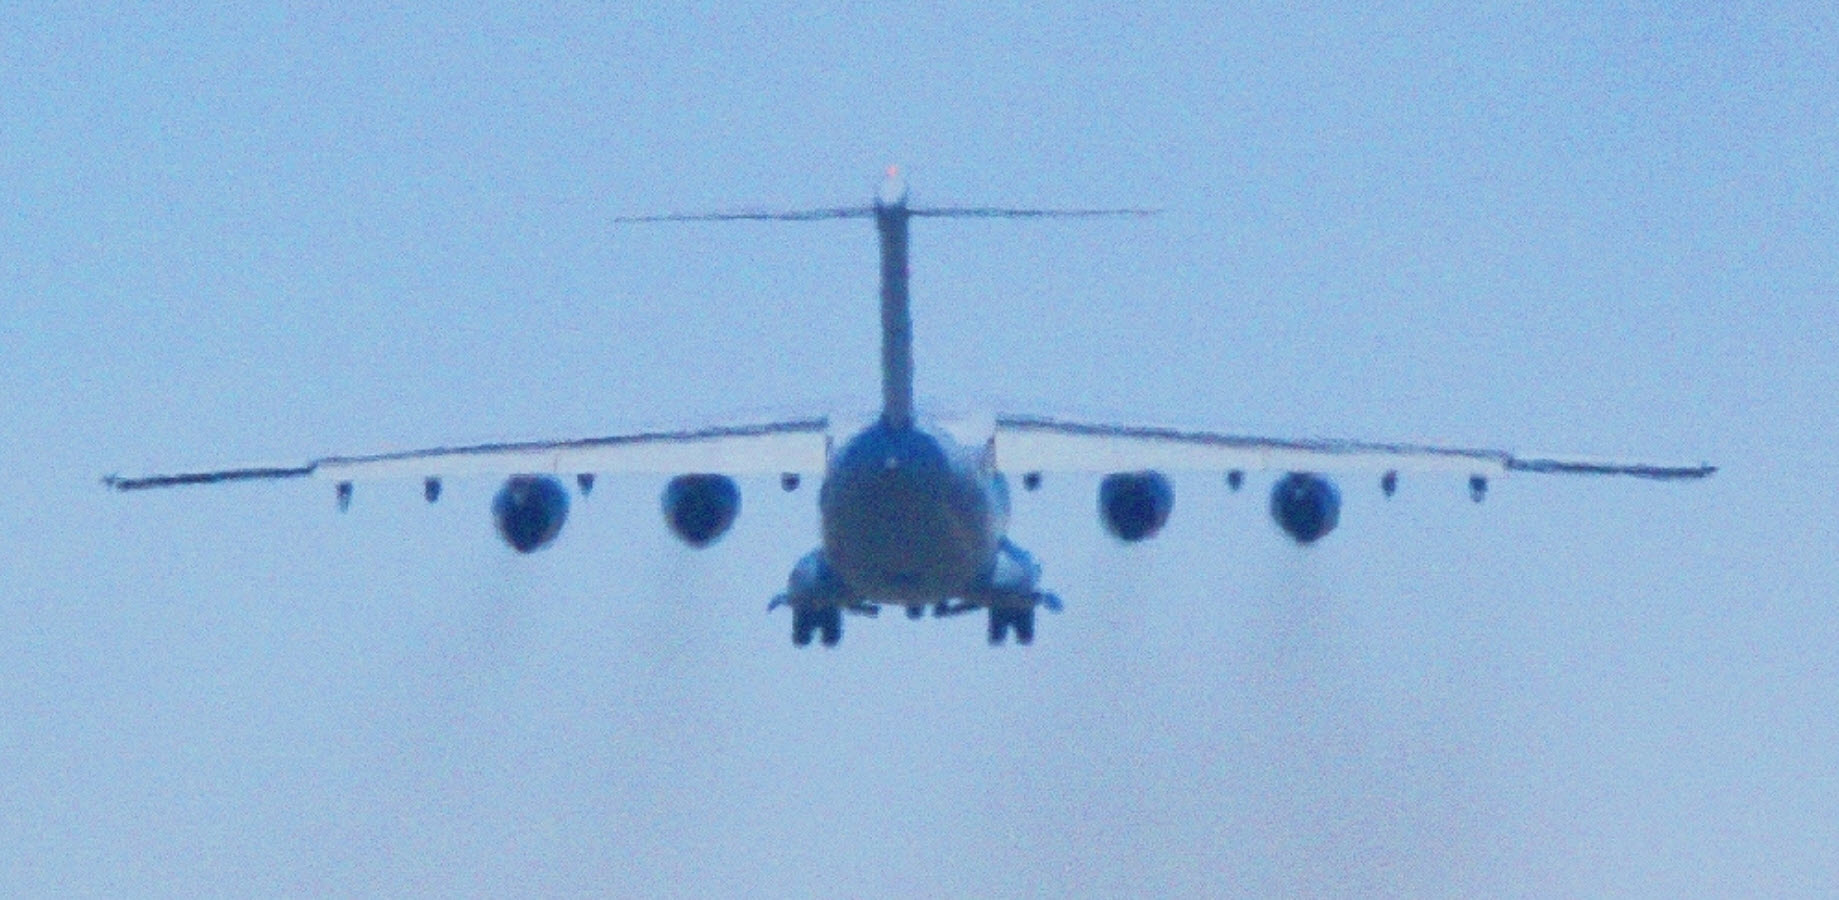 Y-20 equipped with 4 Chinese WS-20 engines made its first successful flight on 20201121.jpg